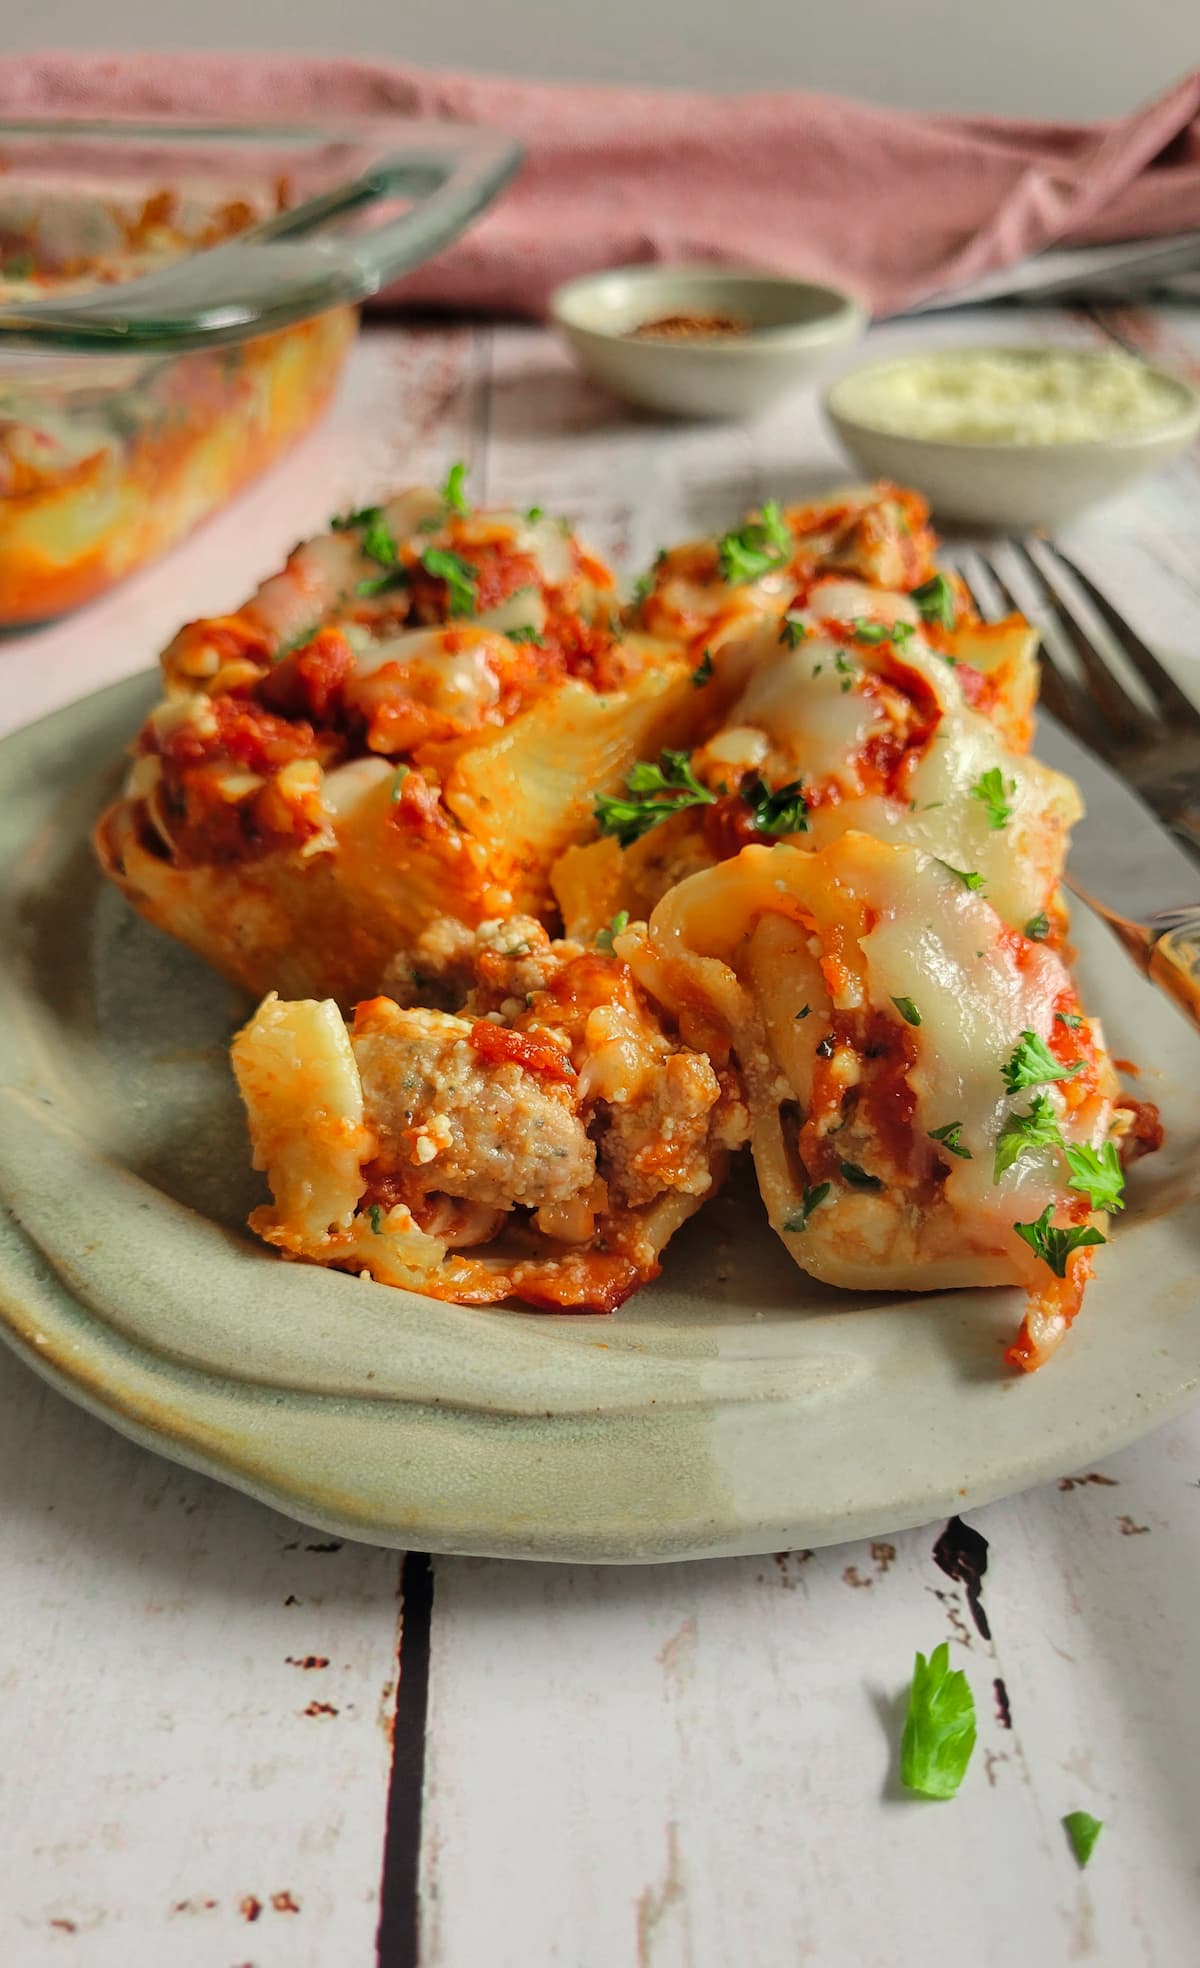 stuffed pasta shells on a plate with cheese, tomato sauce and fresh chopped parsley, the one in the front is cut in half